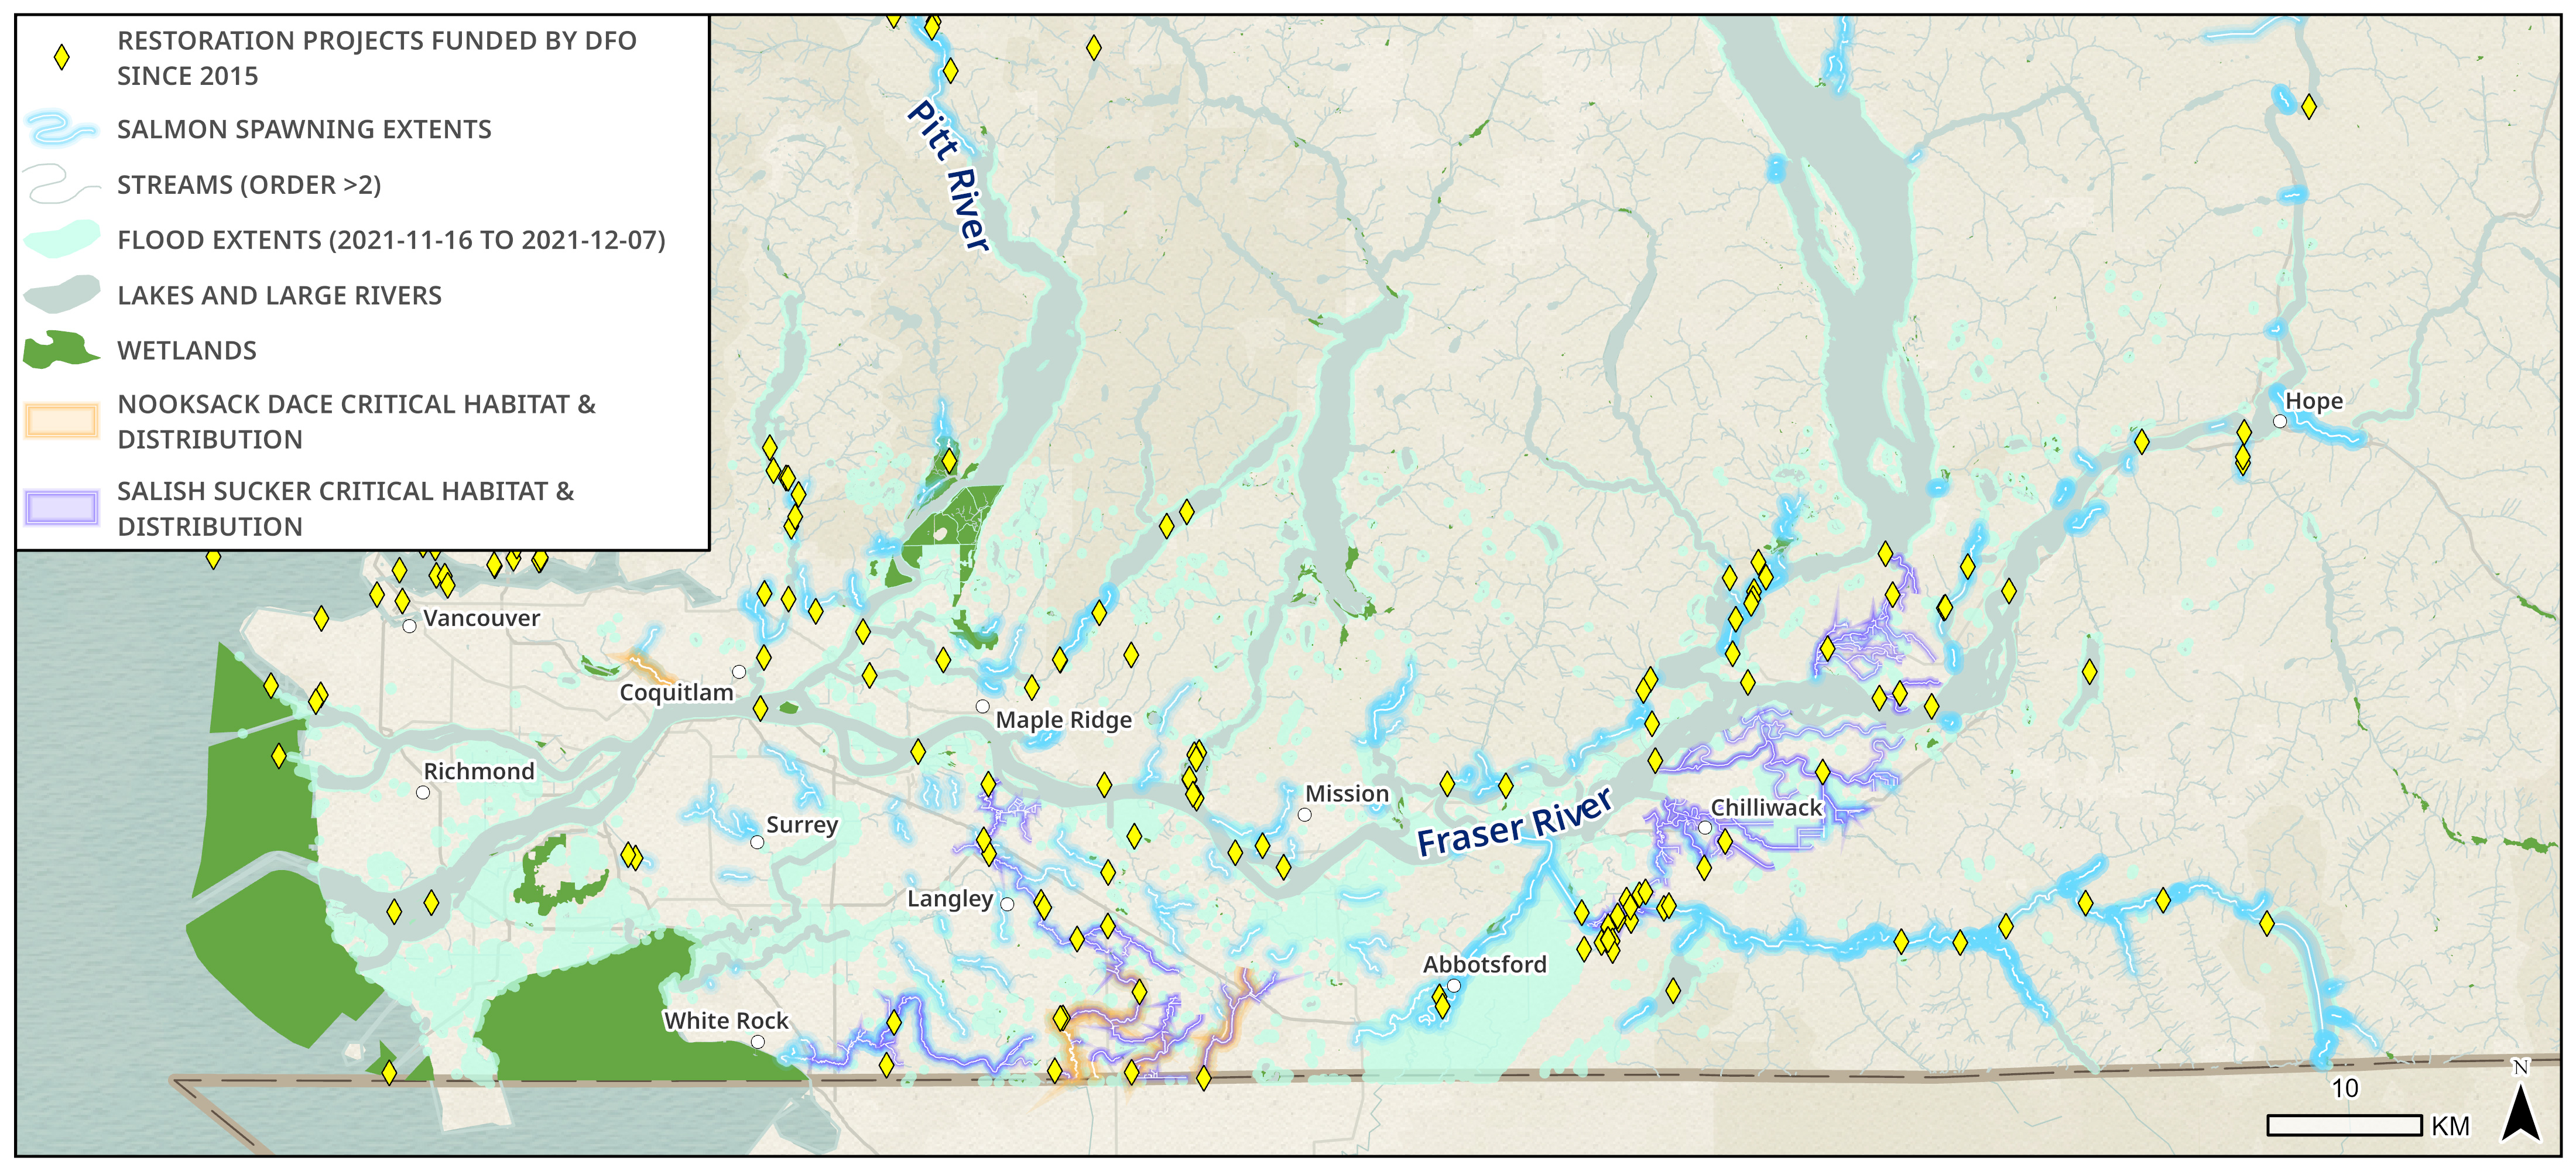 Map showing flooded areas in the Lower Fraser region in relation to restoration sites, salmon spawning extents, and important habitat for fish.